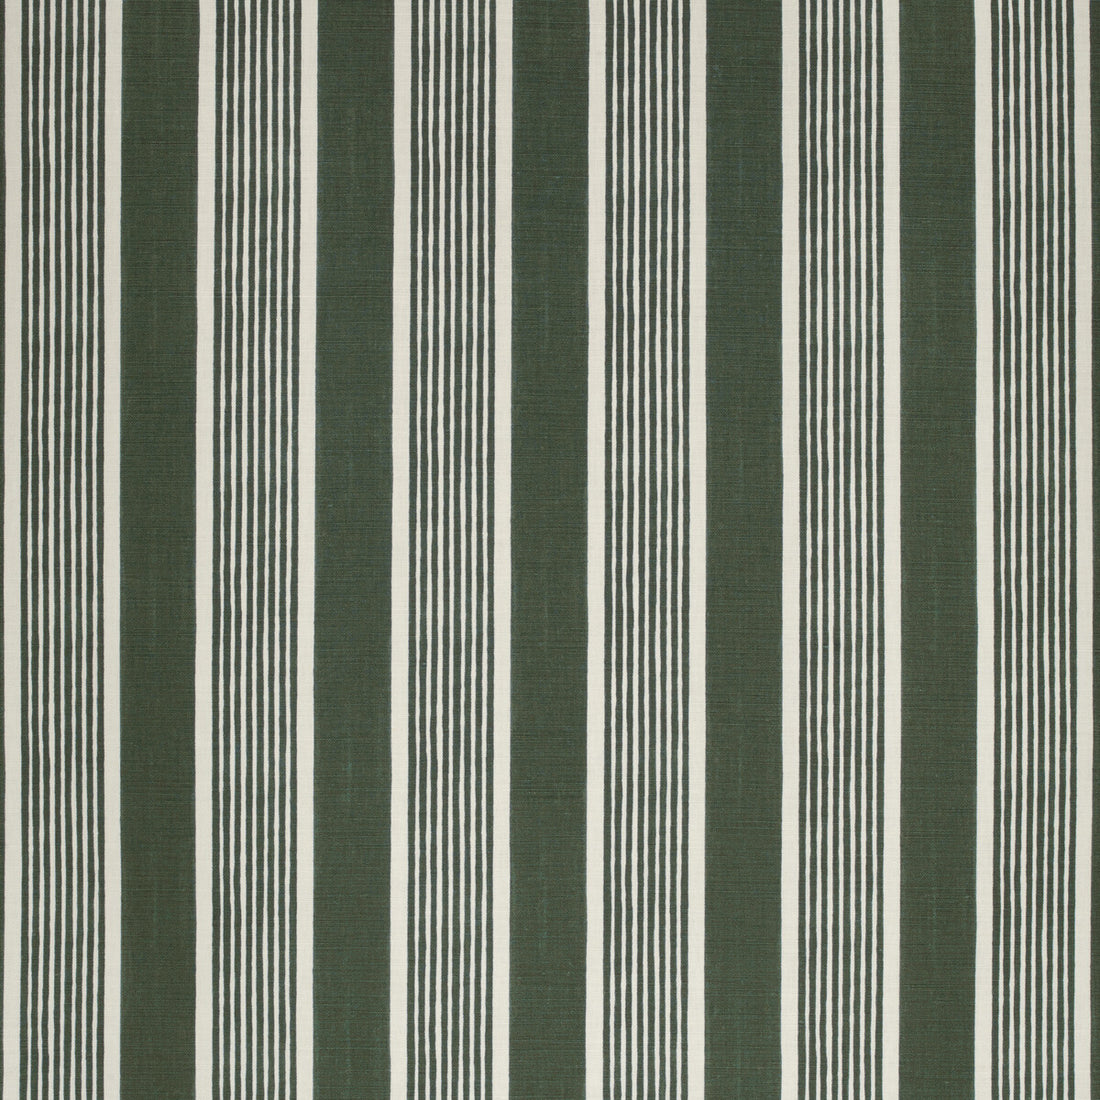 Elba Stripe fabric in dark green color - pattern 2020131.303.0 - by Lee Jofa in the Paolo Moschino Fabrics collection